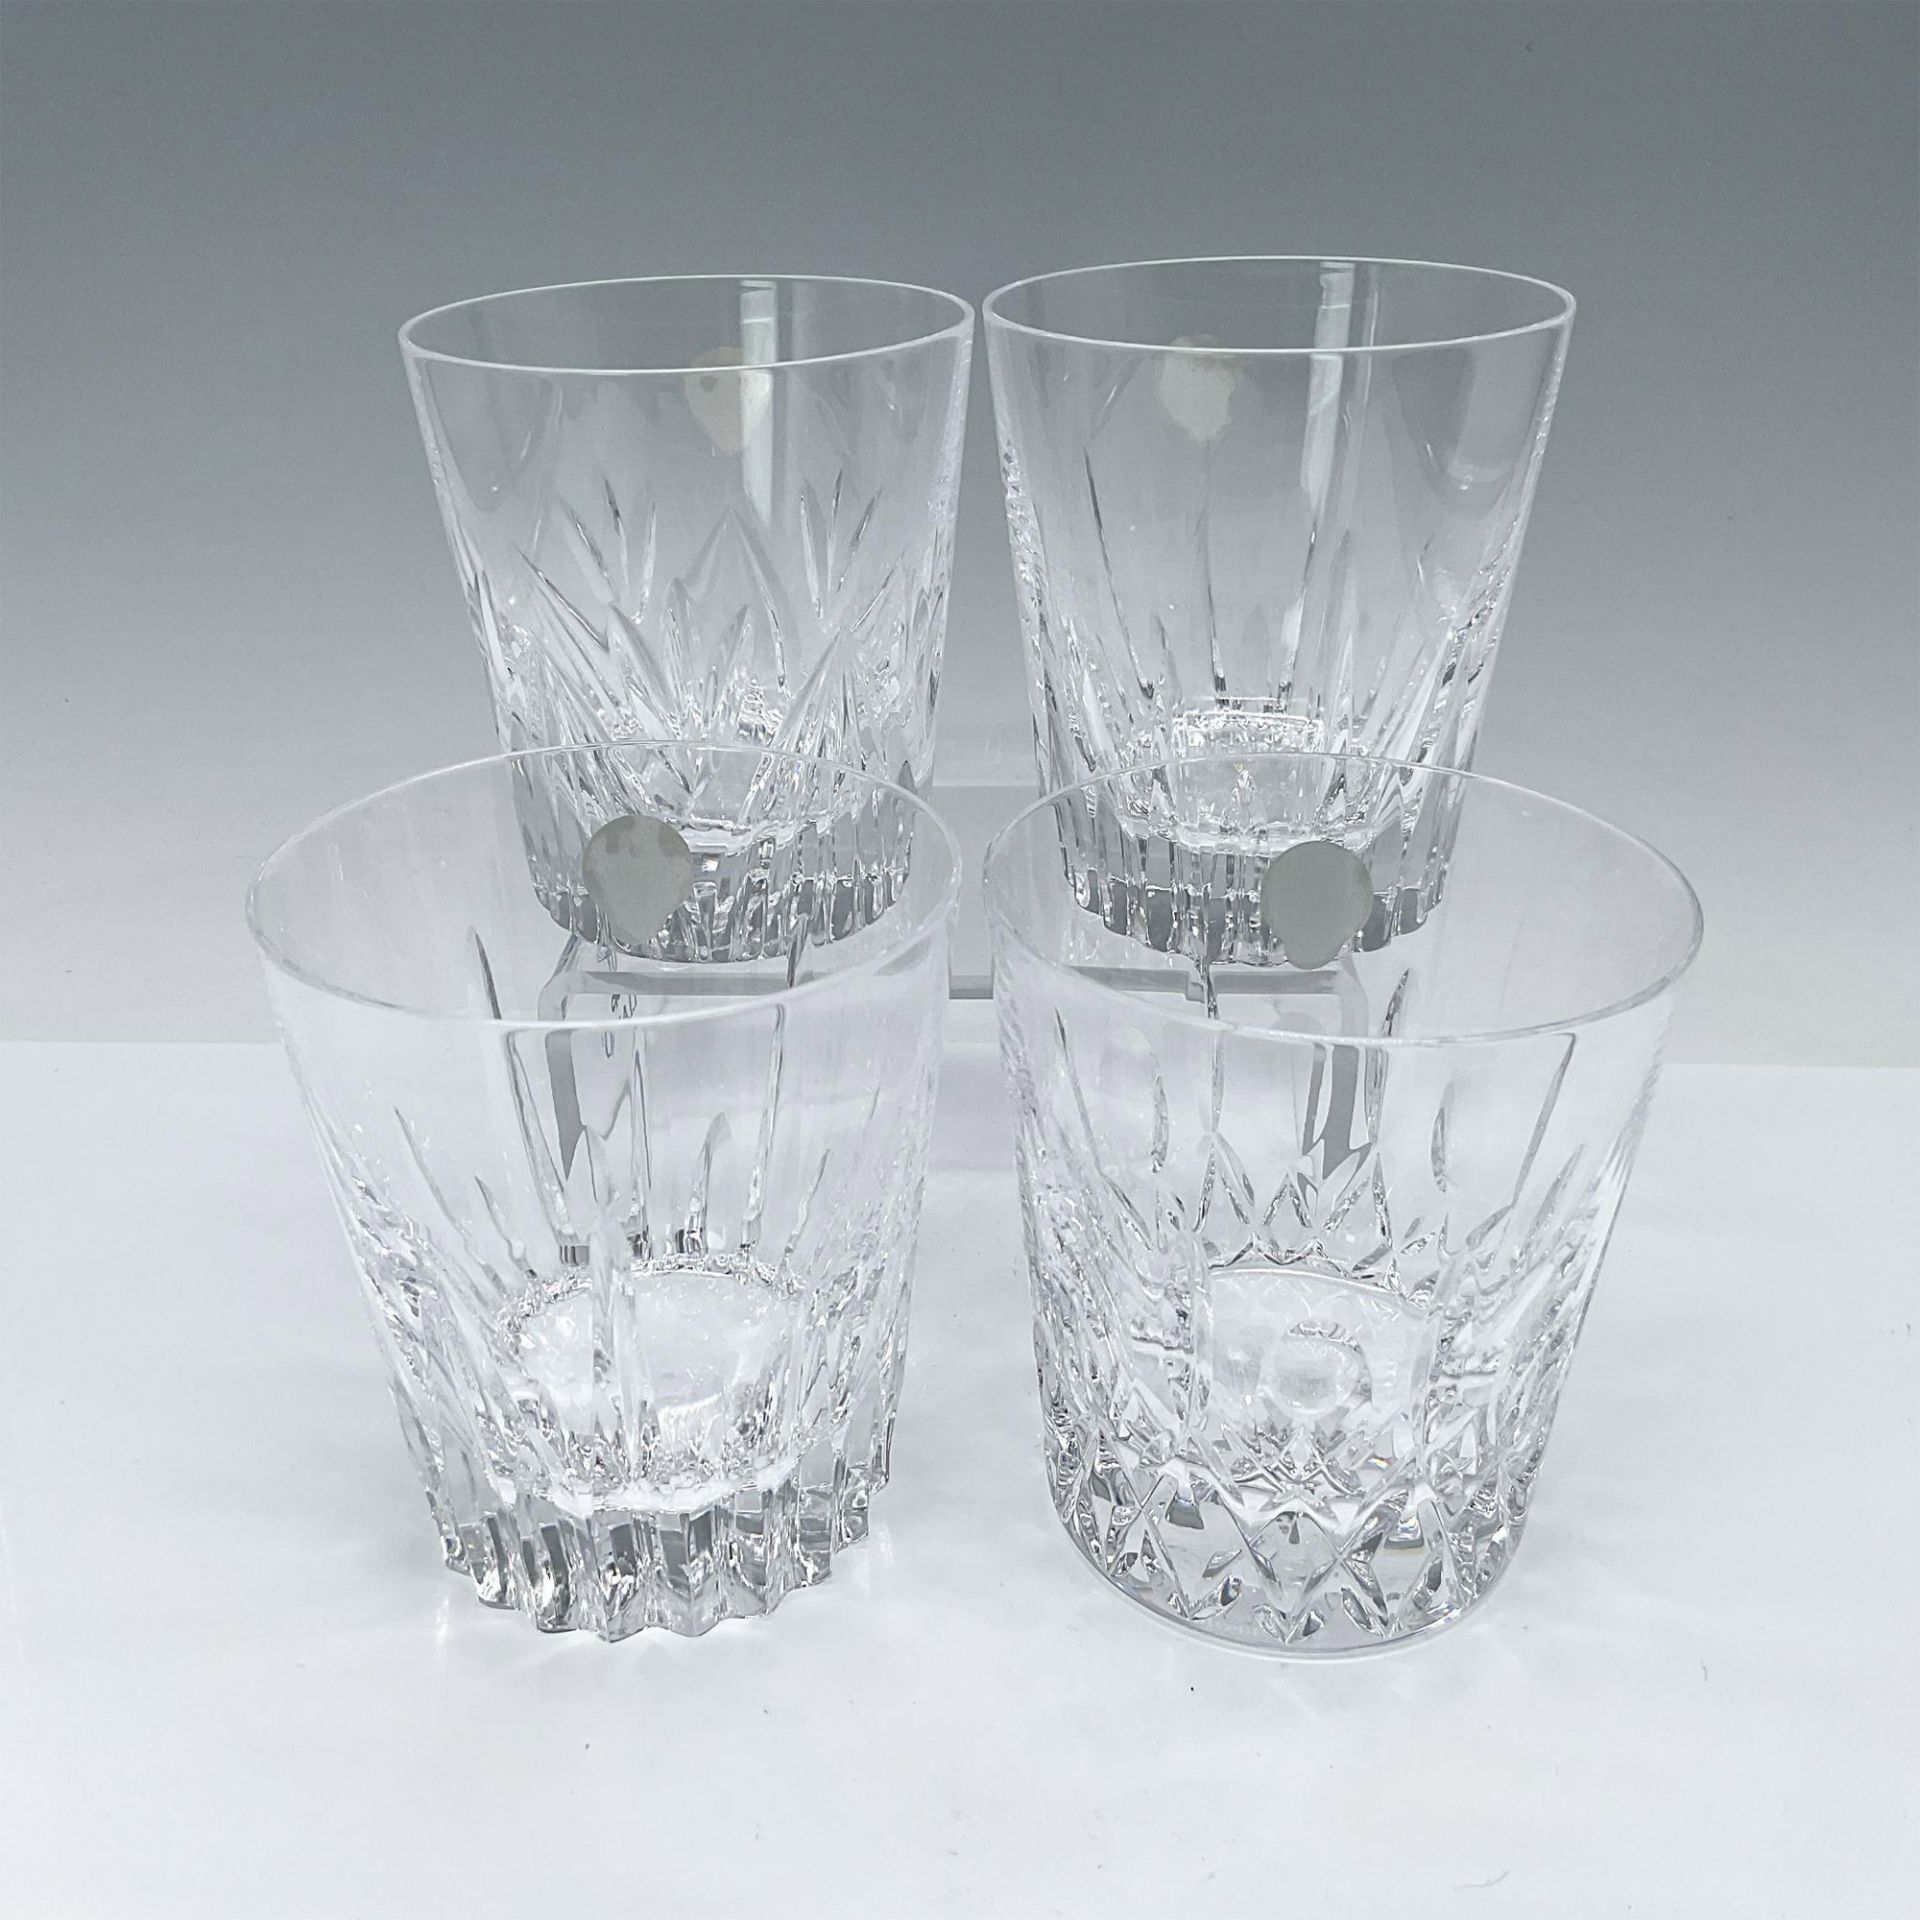 4pc Waterford Crystal Rocks Glasses, Mixed Patterns Set - Image 2 of 4